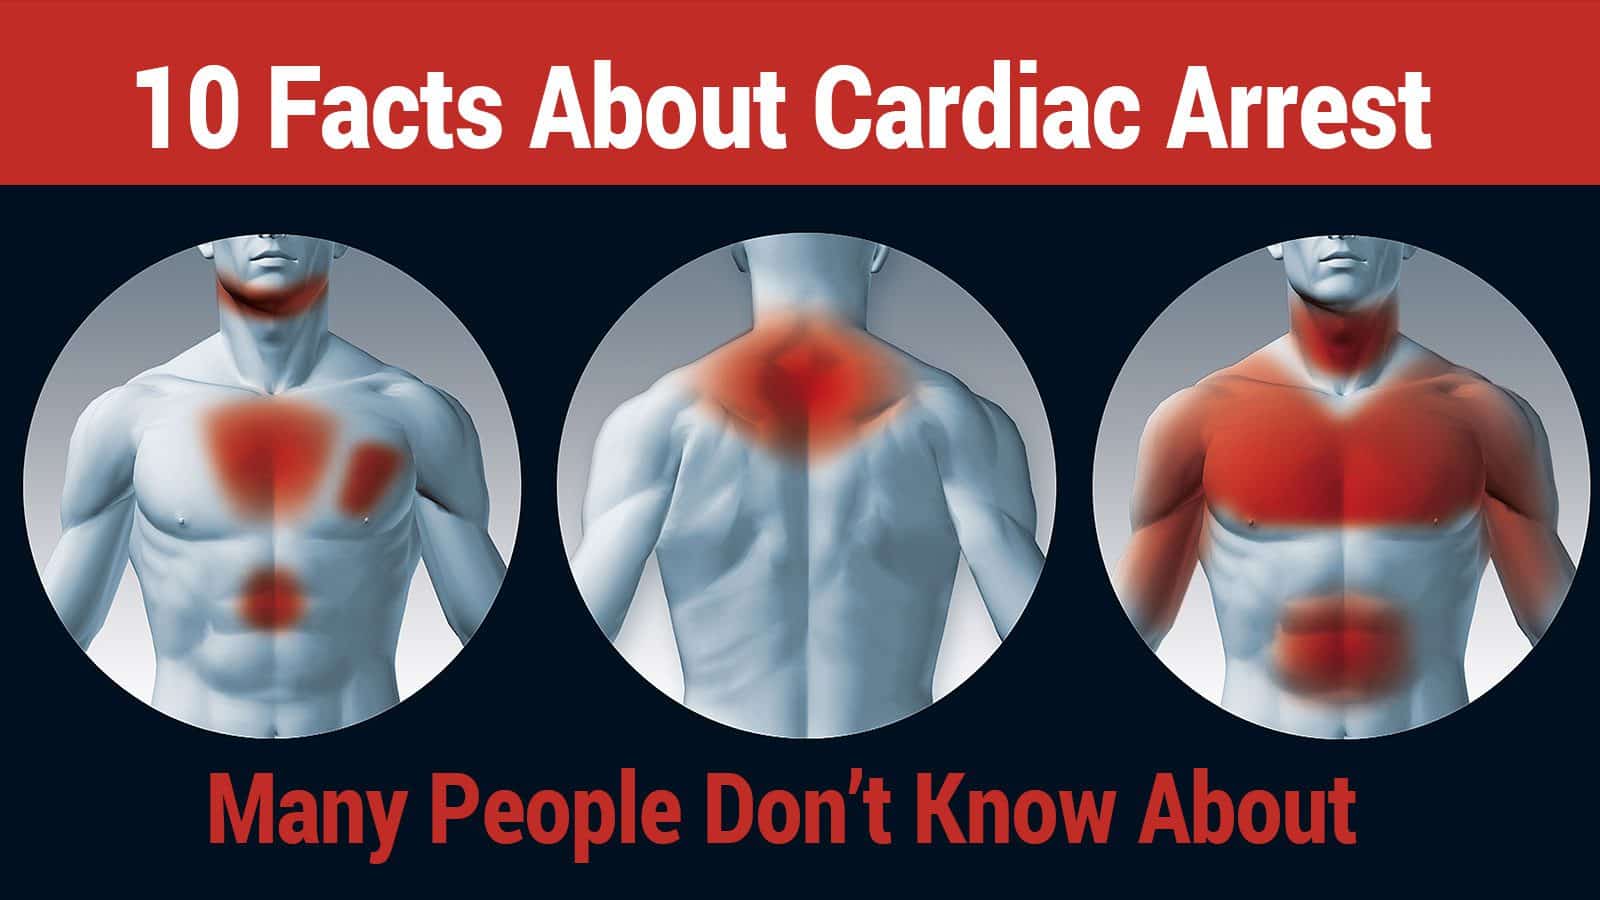 10 Facts About Cardiac Arrest Many People Don’t Know About